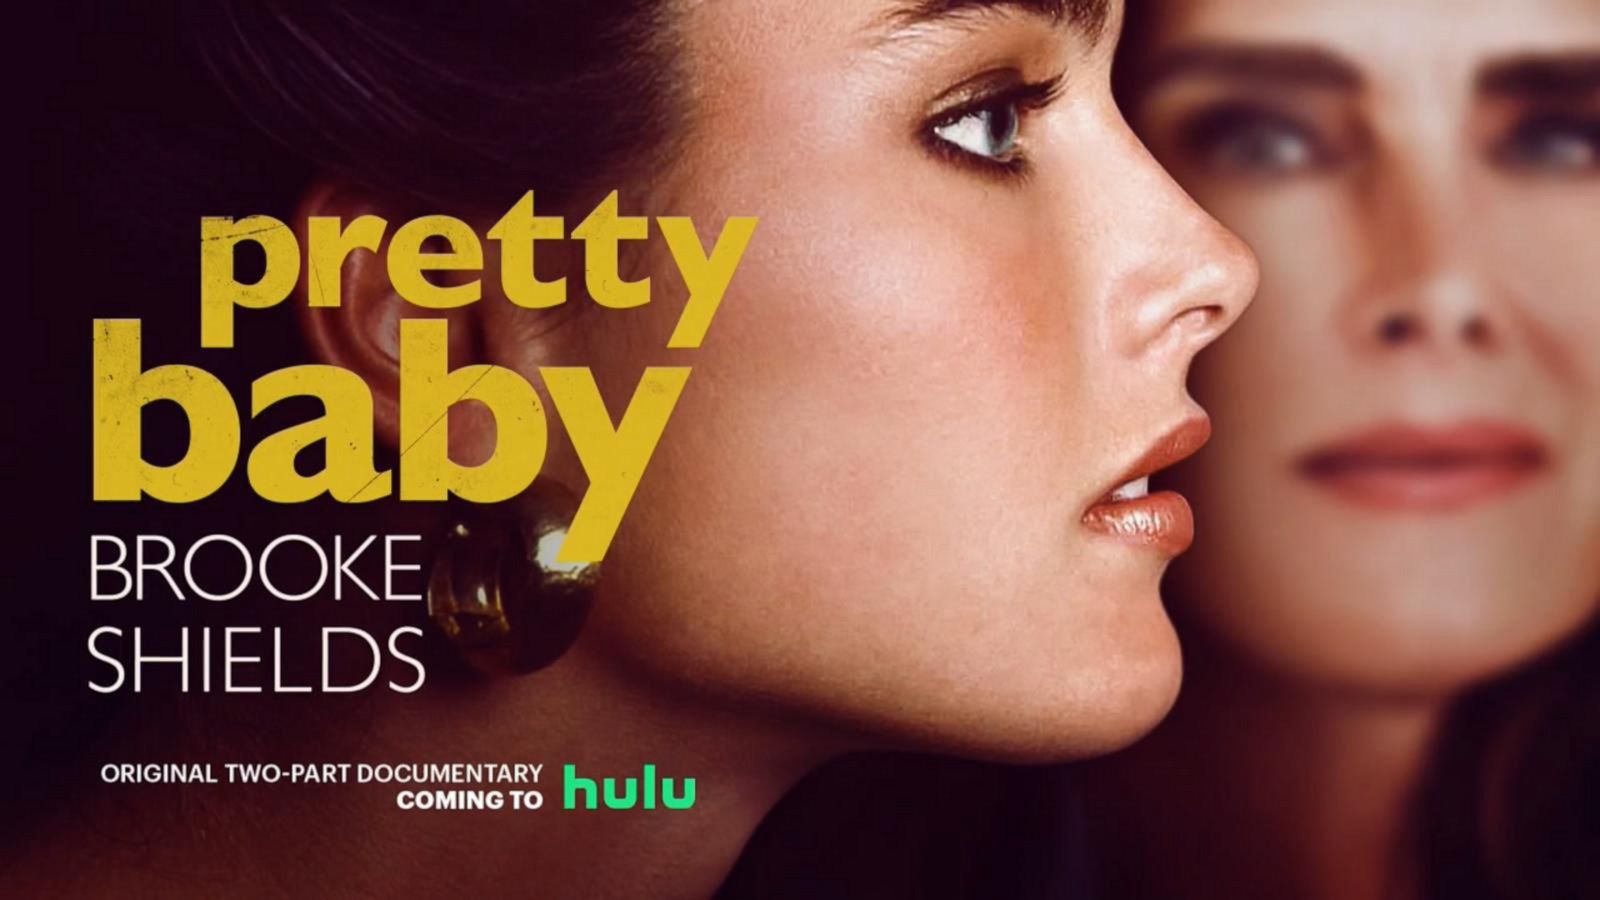 The official poster for Pretty Baby: Brooke Shields